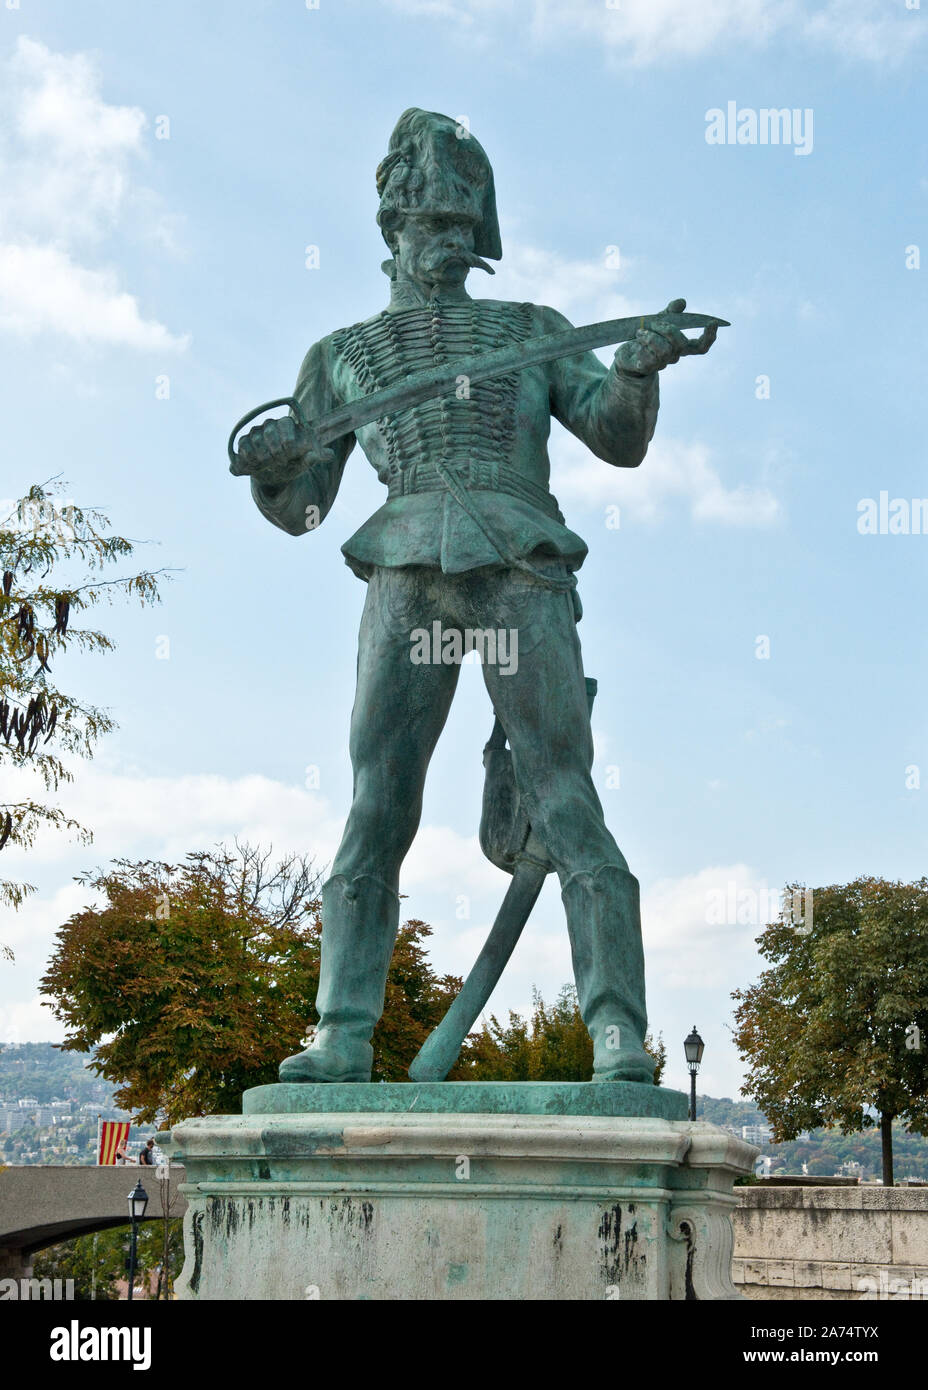 Statue of Old Hussar. Bronze statue of Hungarian Hussar officer. Castle District, Buda, Budapest. Stock Photo